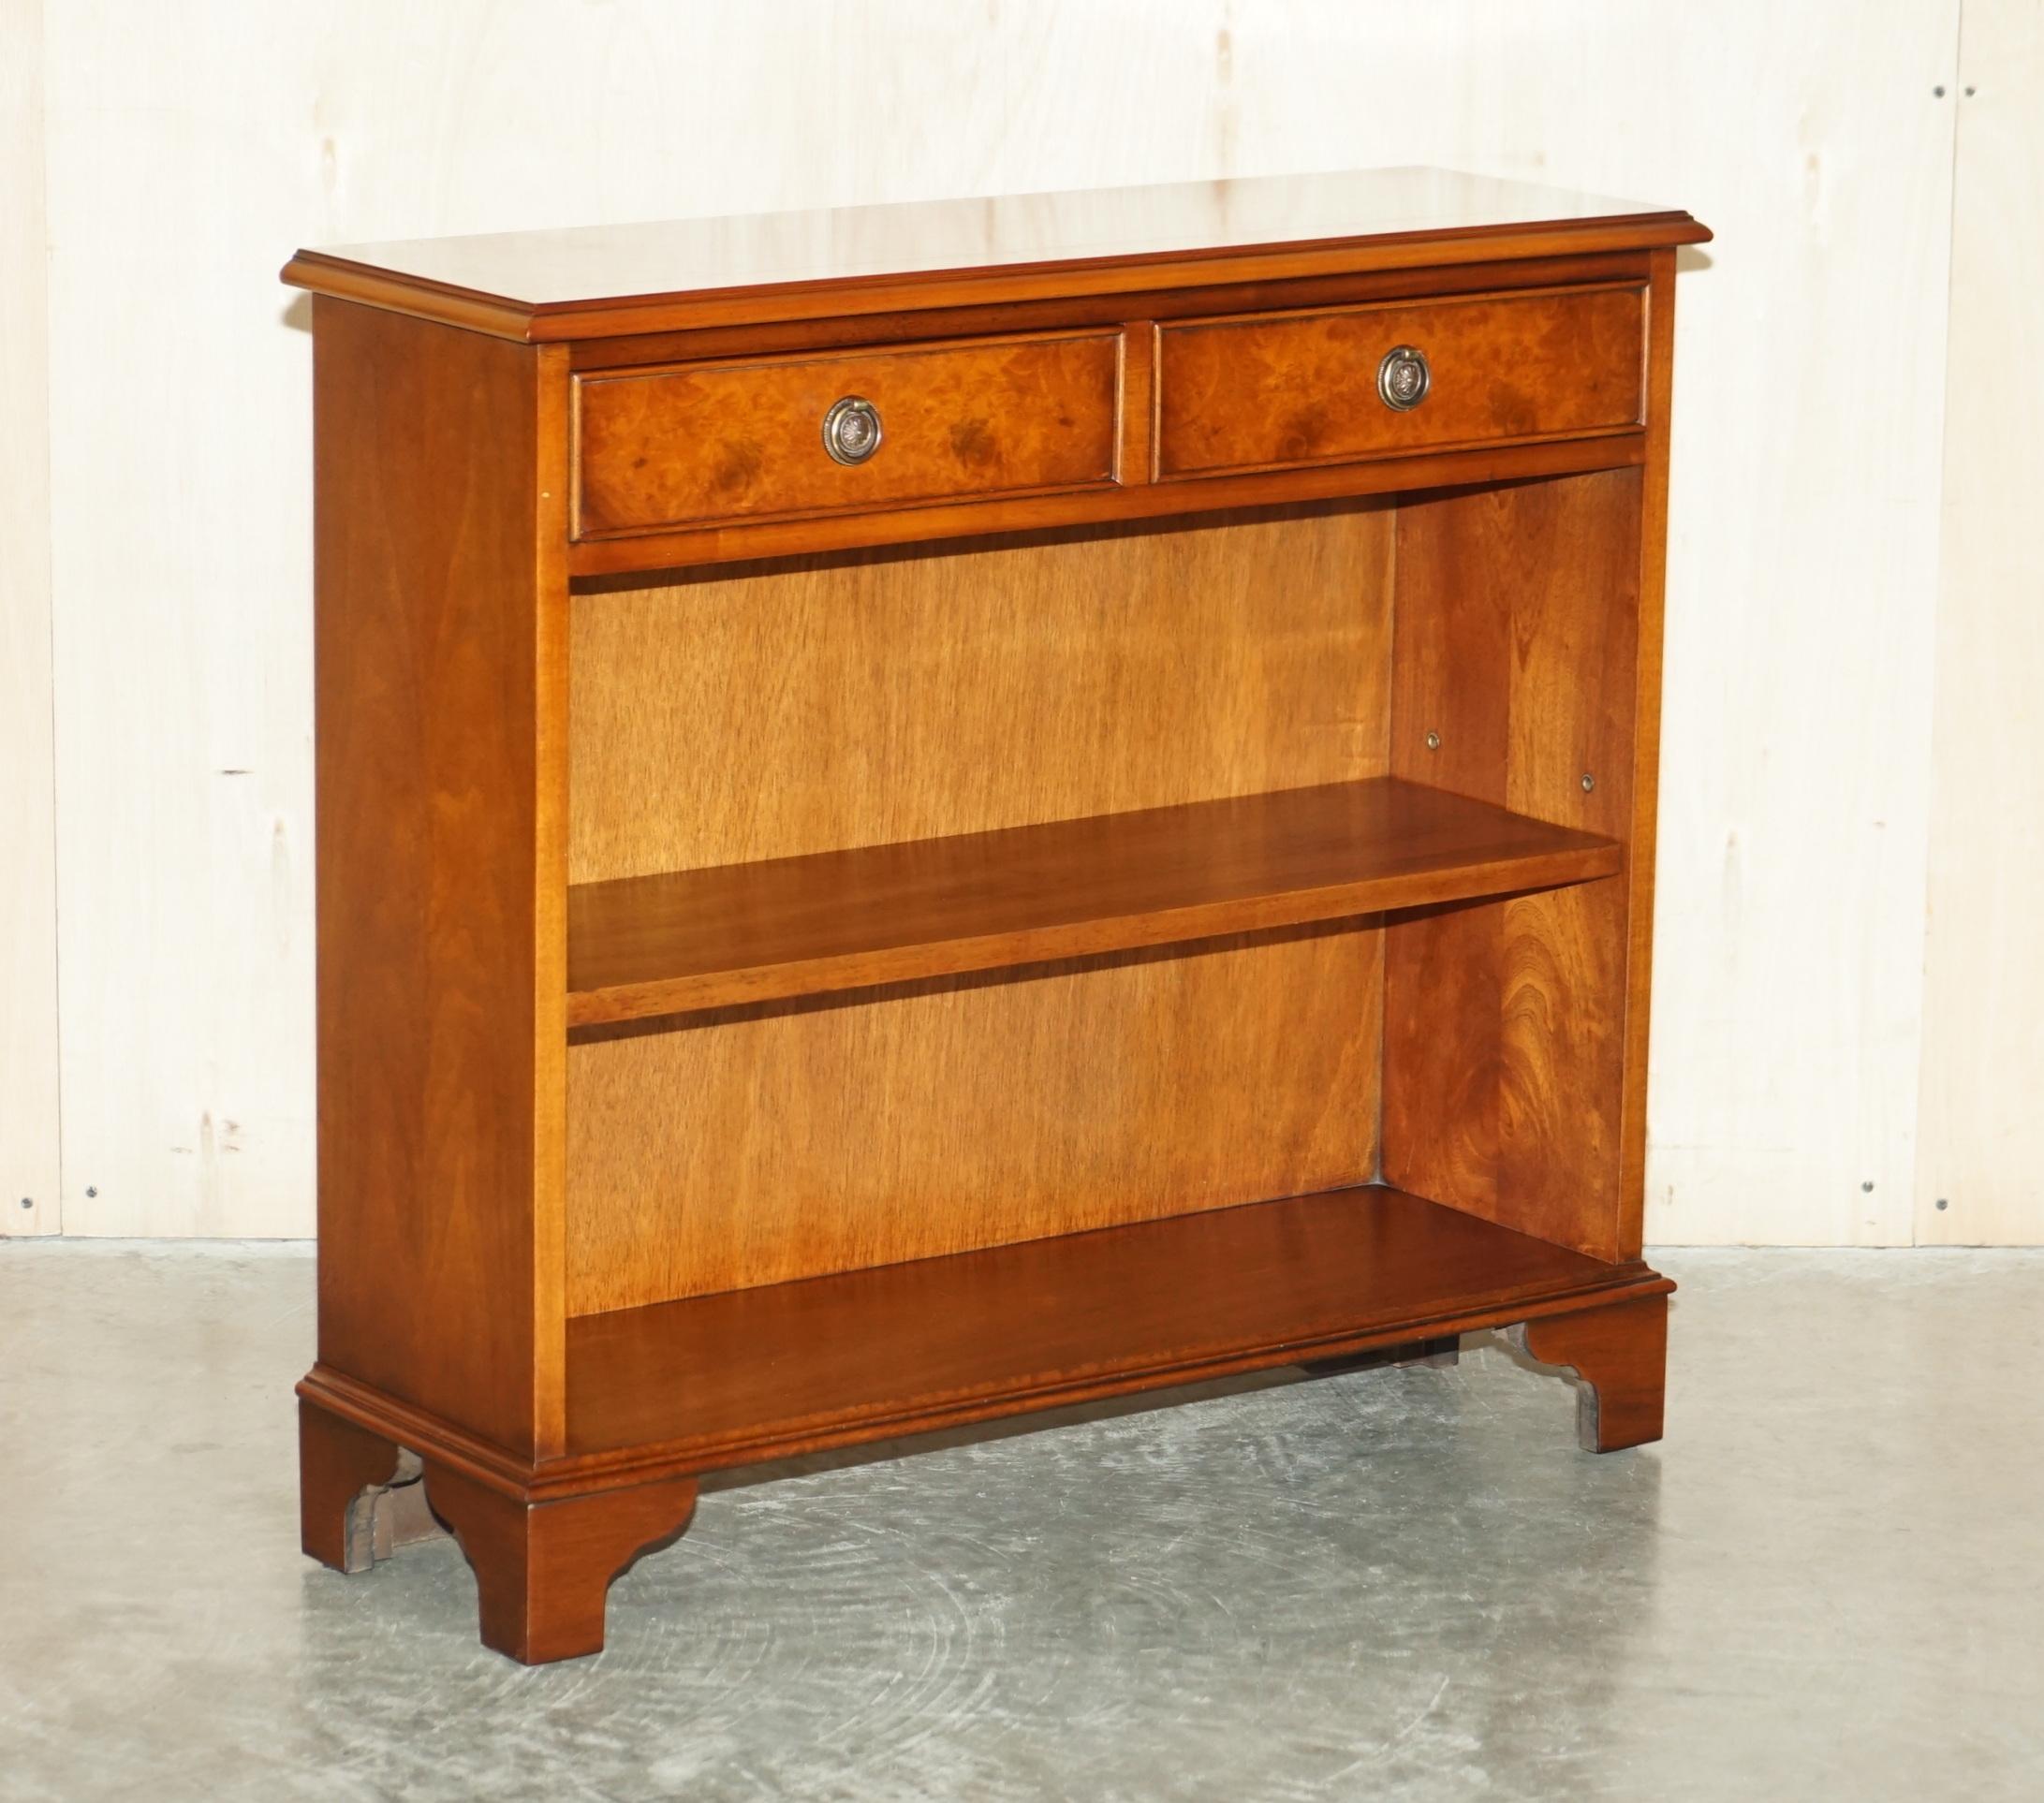 We are delighted to offer for this lovely Jan Smith Furniture Burr Walnut dwarf open library bookcase with twin drawers

A very good looking well made and decorative piece, the shelf is height adjustable and or removable so it can be adjusted to